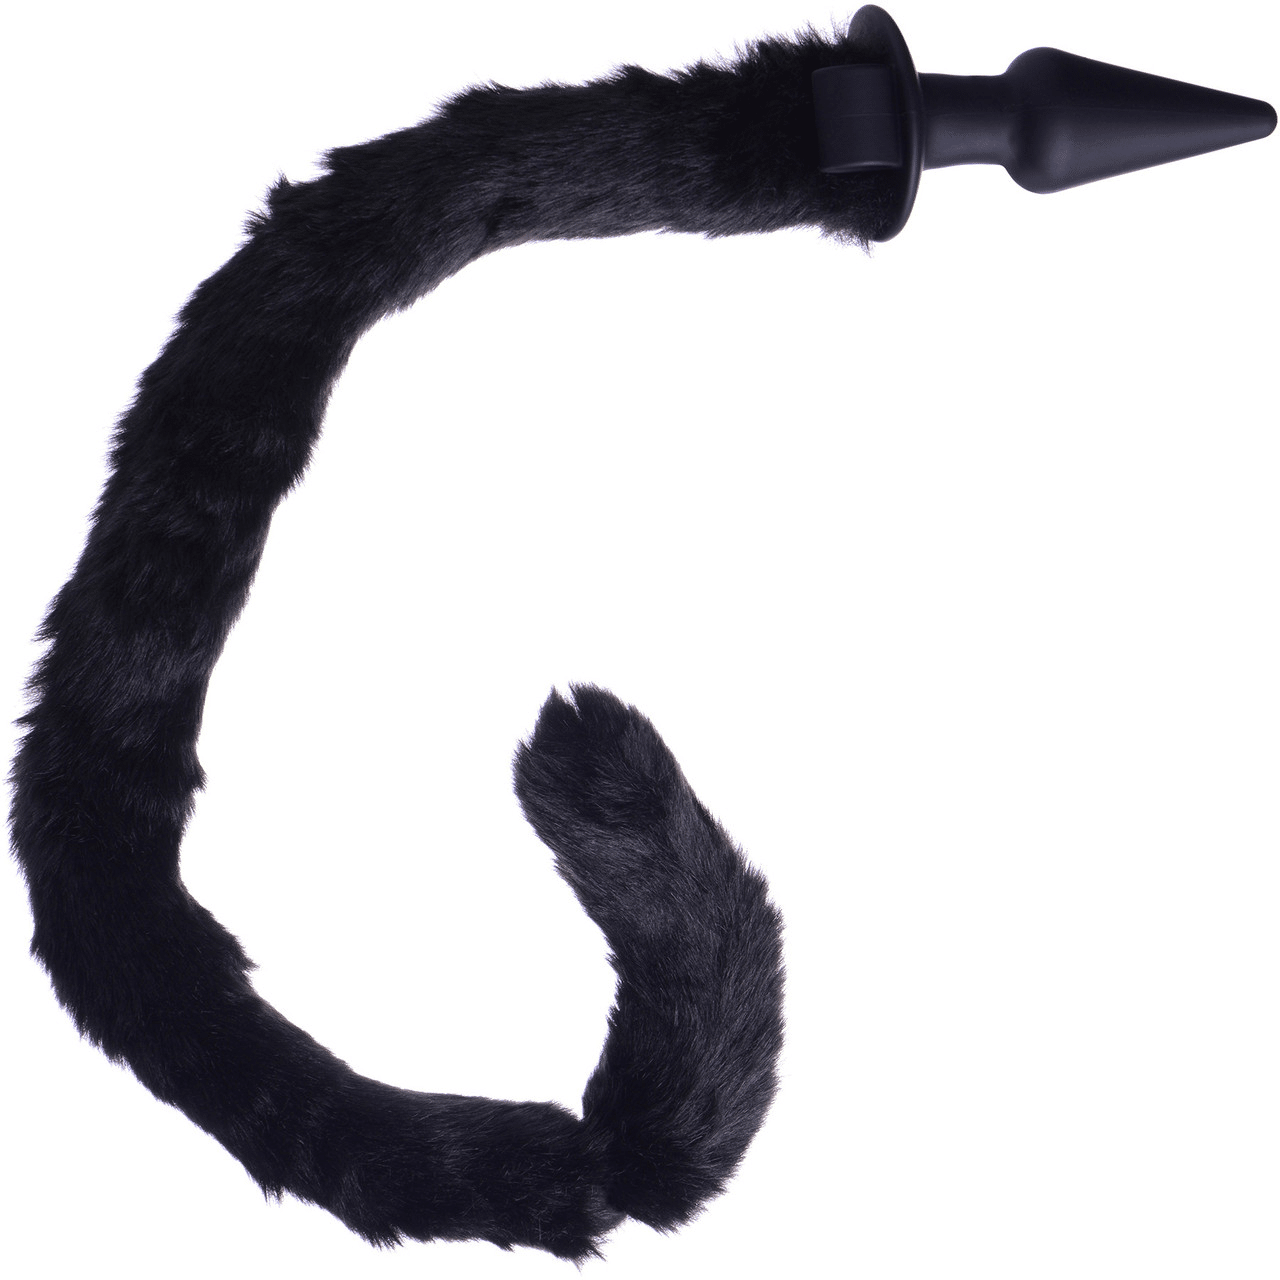 Product Tailz Anal Plug With Black Faux Fur Cat Tail & Cat Mask 